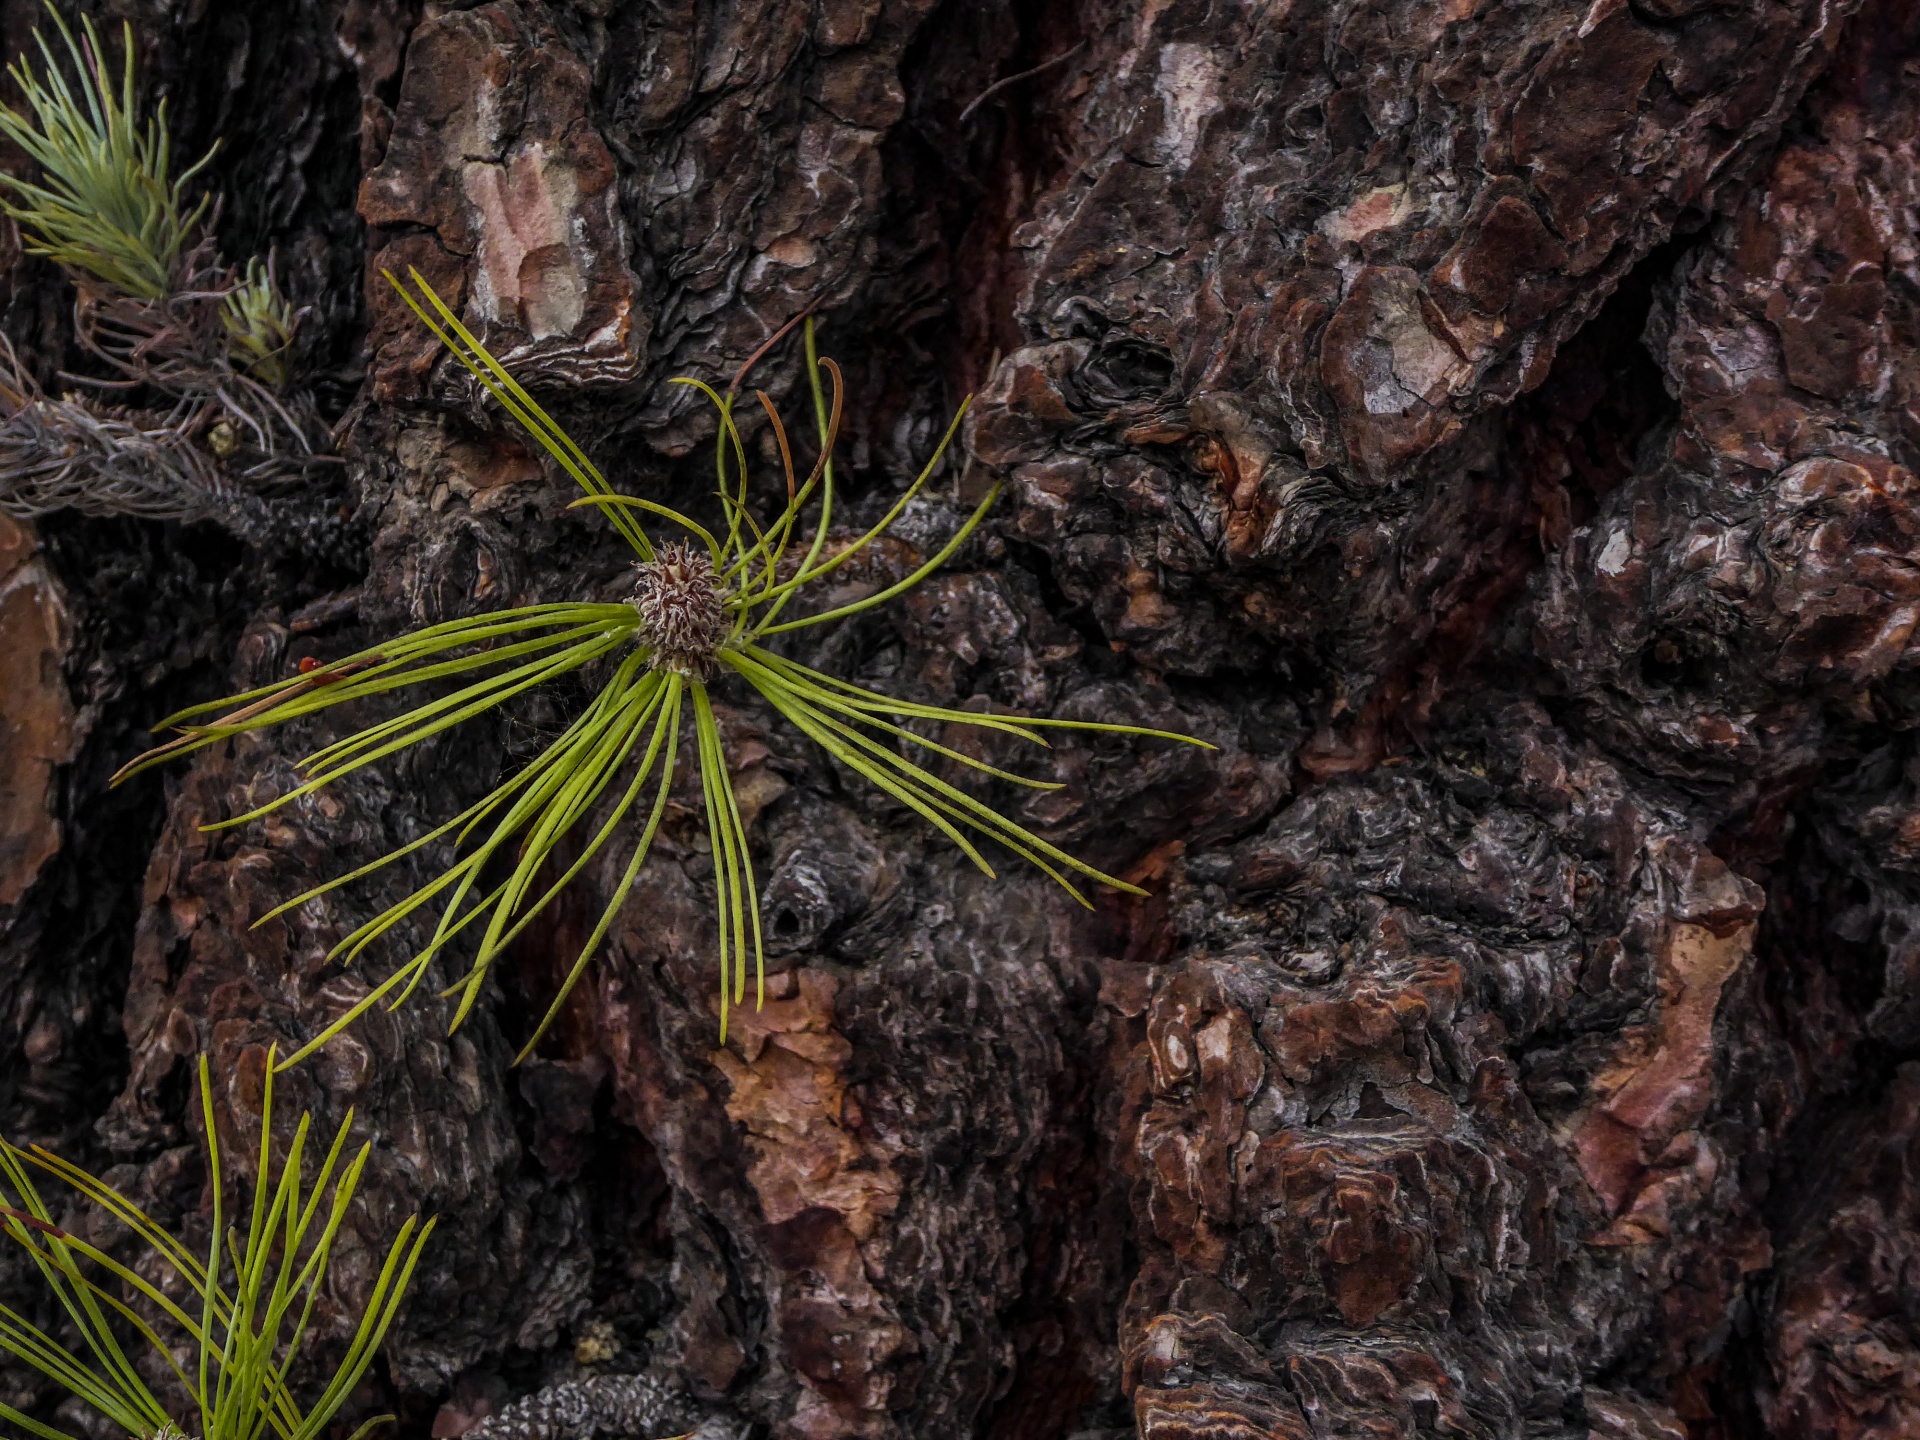 Background suitable image of a tree with new sprouts of pine needles growing from the bark